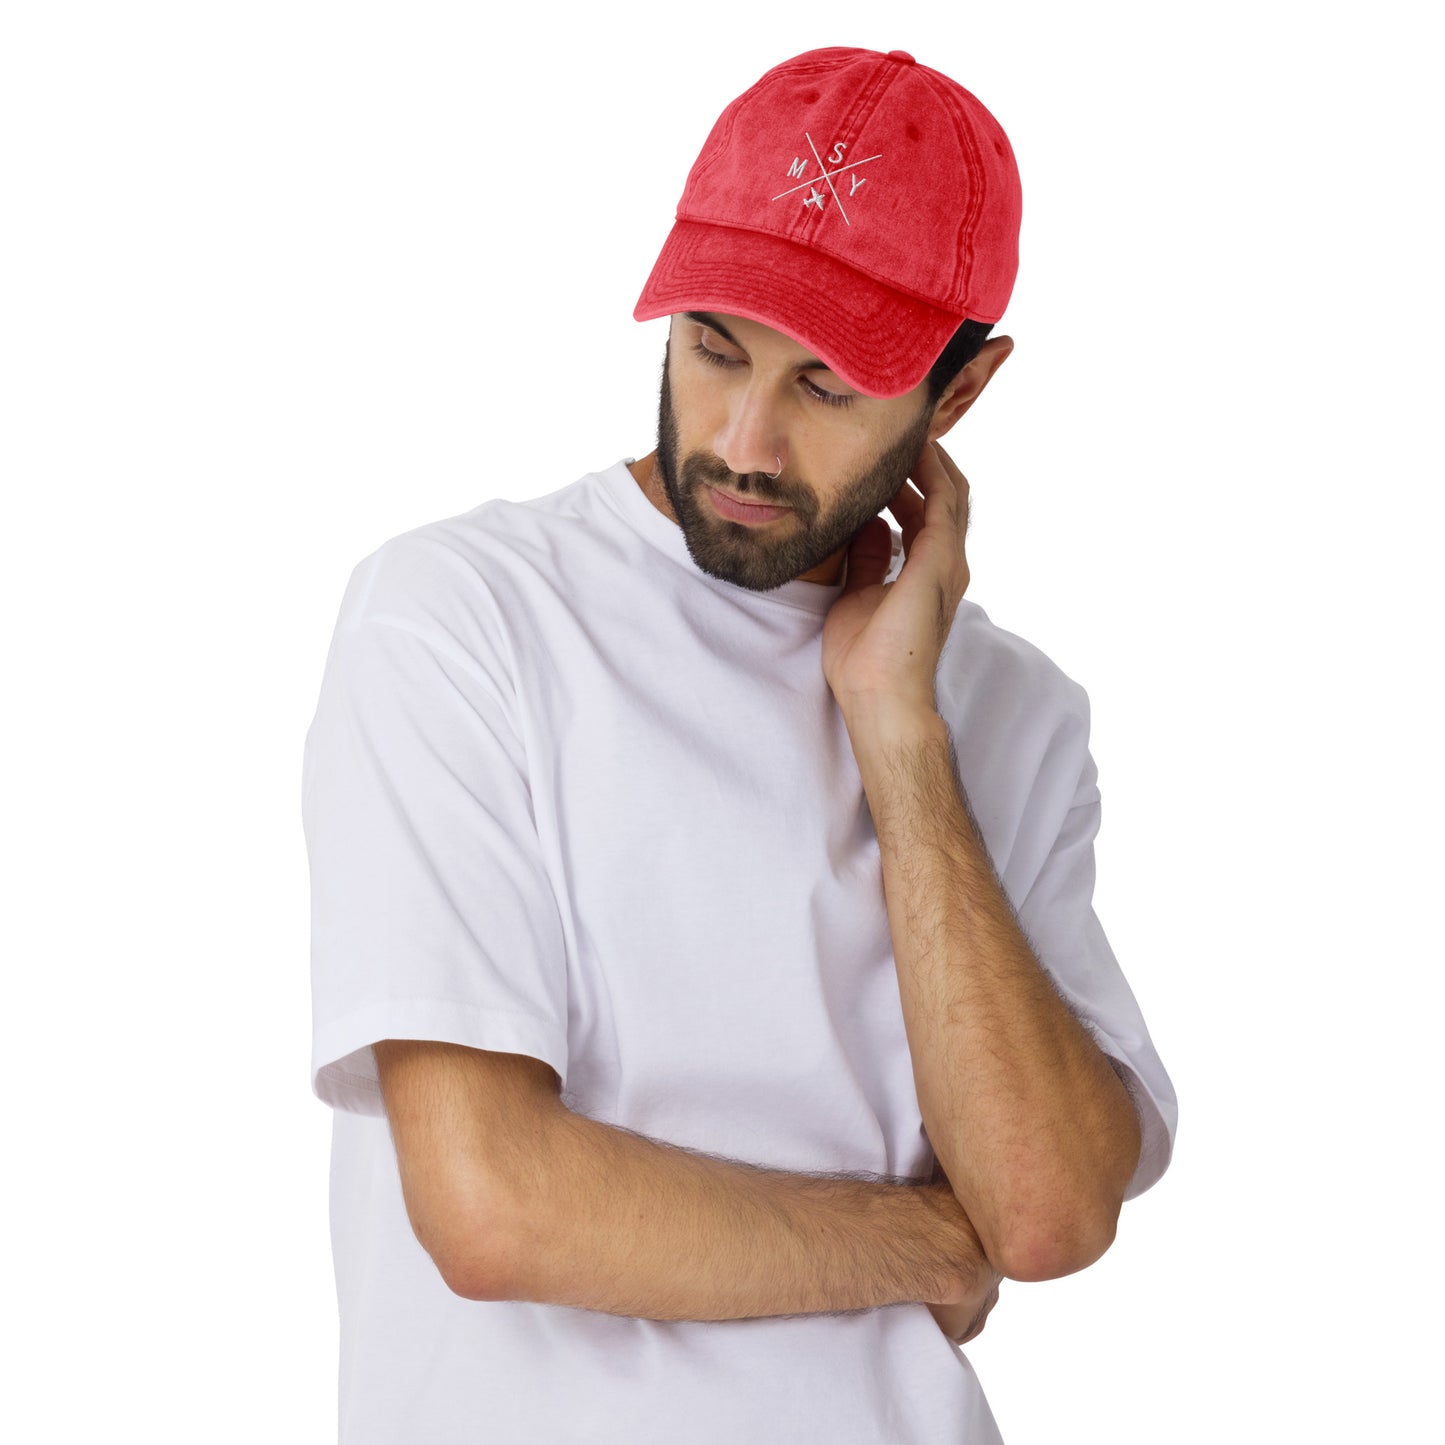 Crossed-X Cotton Twill Cap - White • MSY New Orleans • YHM Designs - Image 08